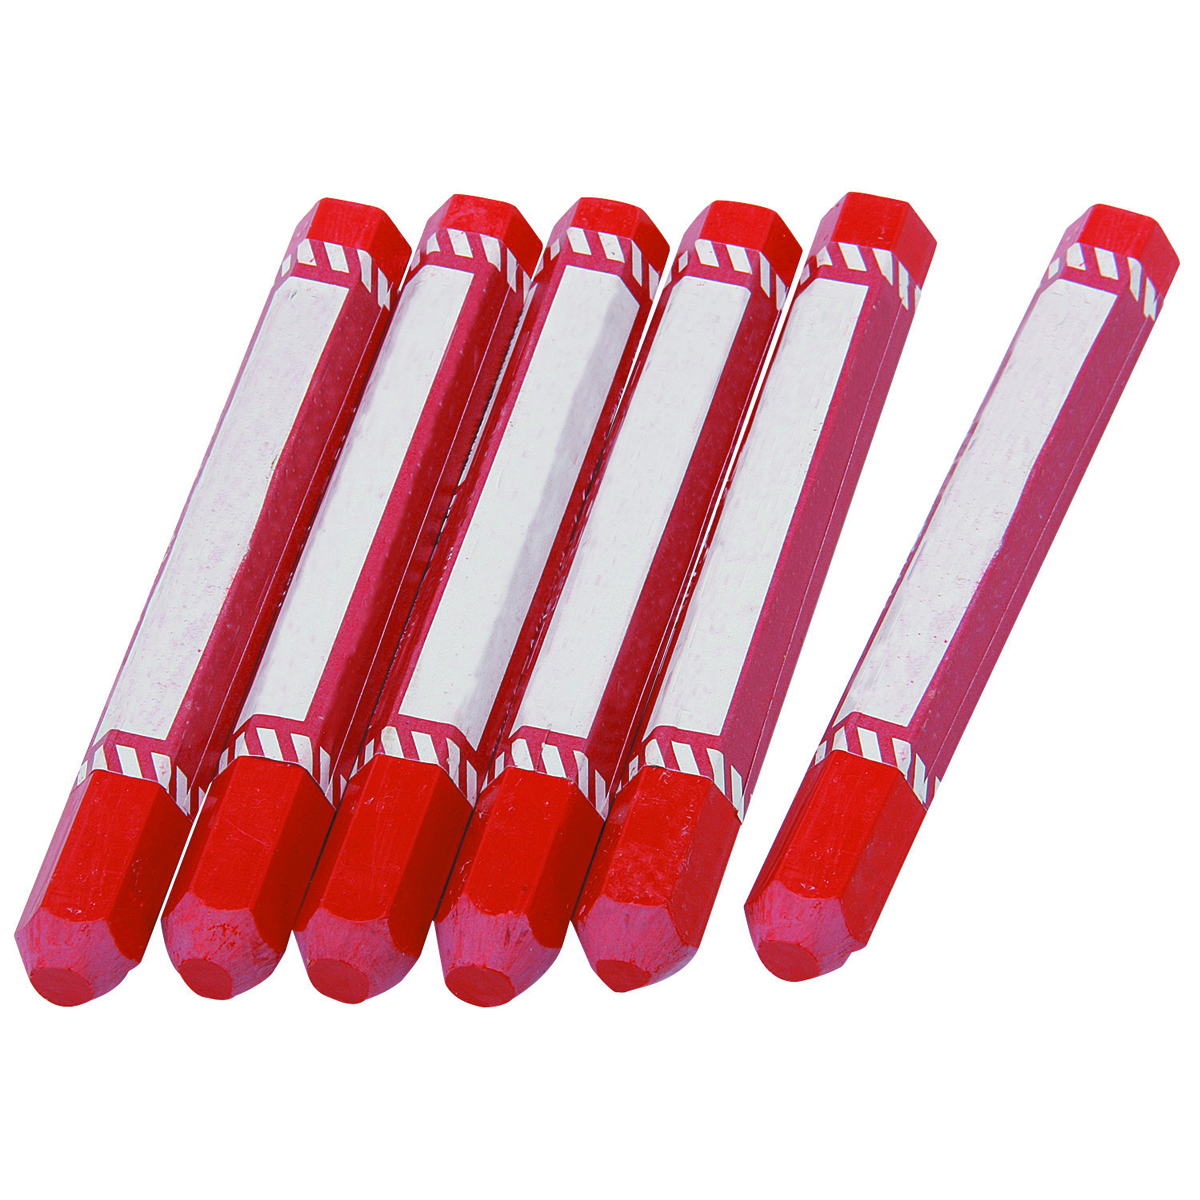 PITTSBURGH Red Marking Crayons 6 Pc. - Item 65198